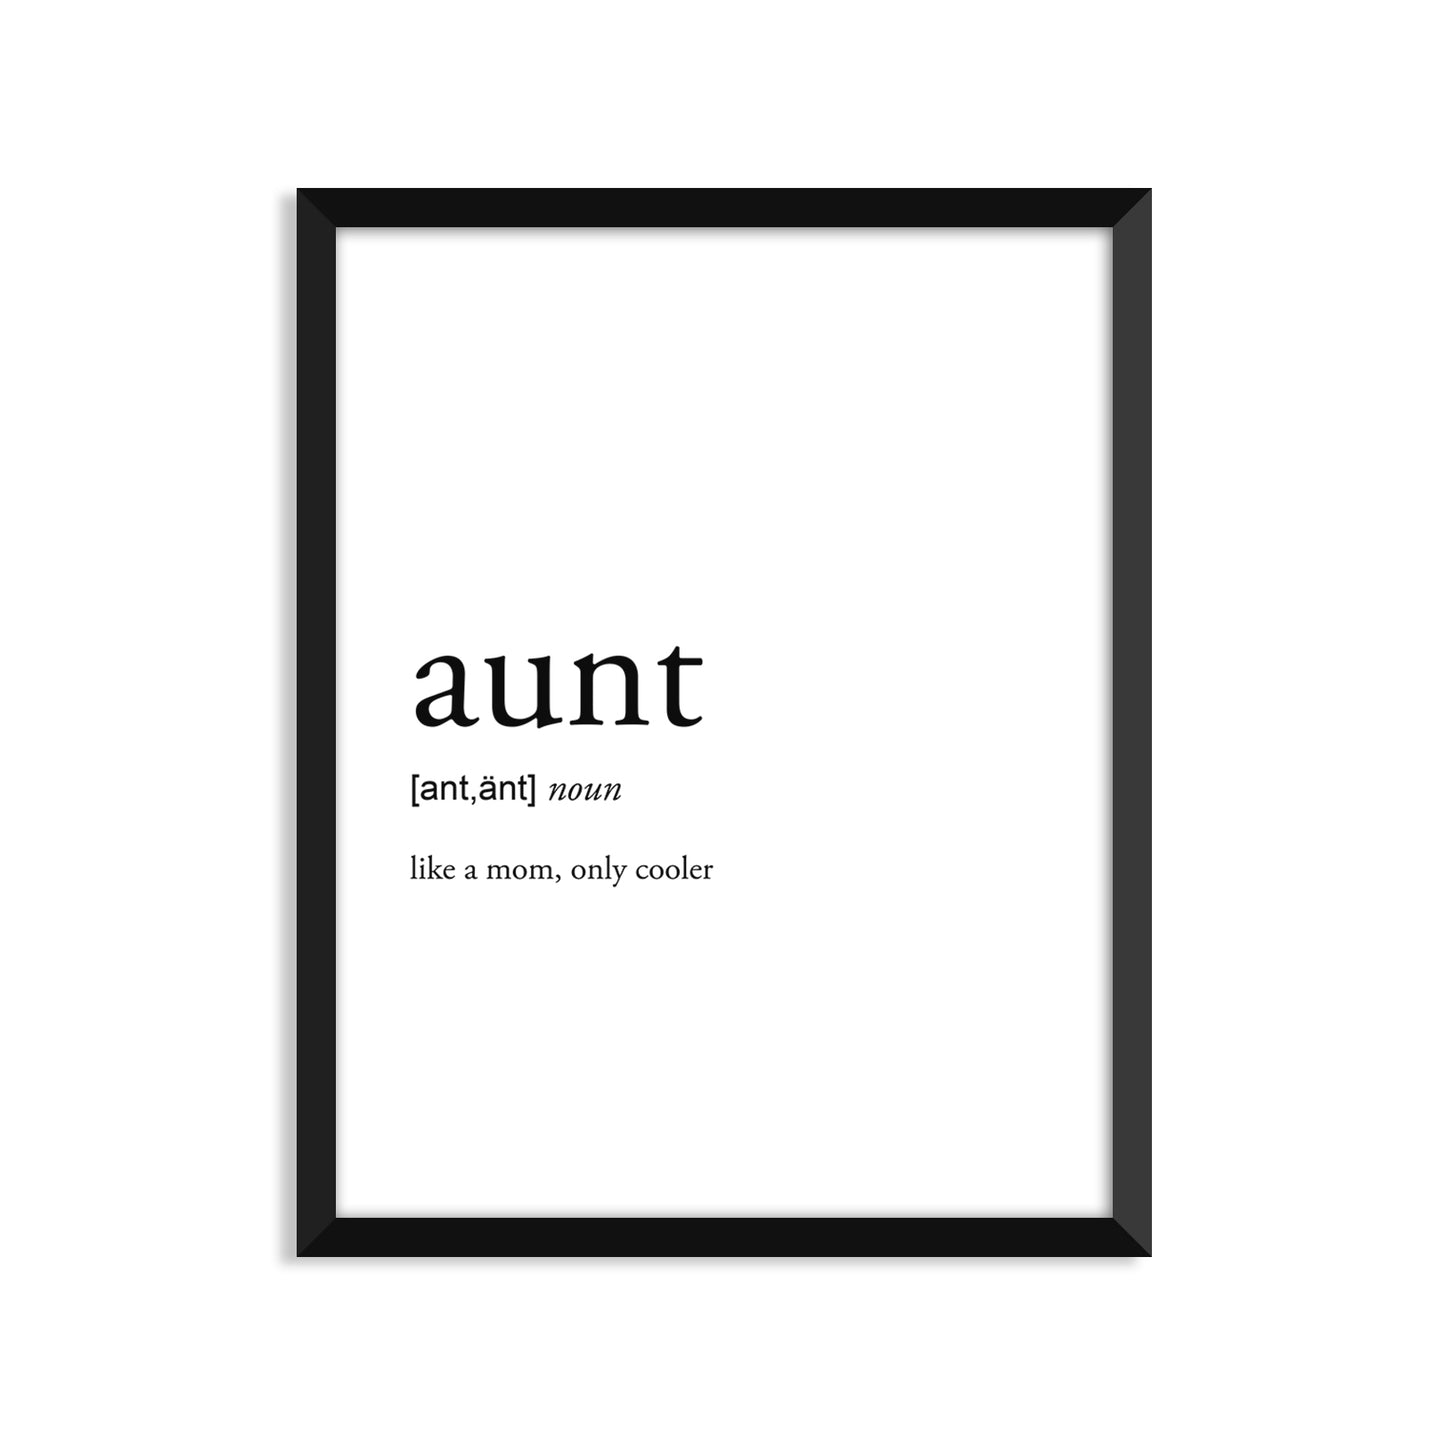 Aunt Definition - Unframed Art Print Or Greeting Card